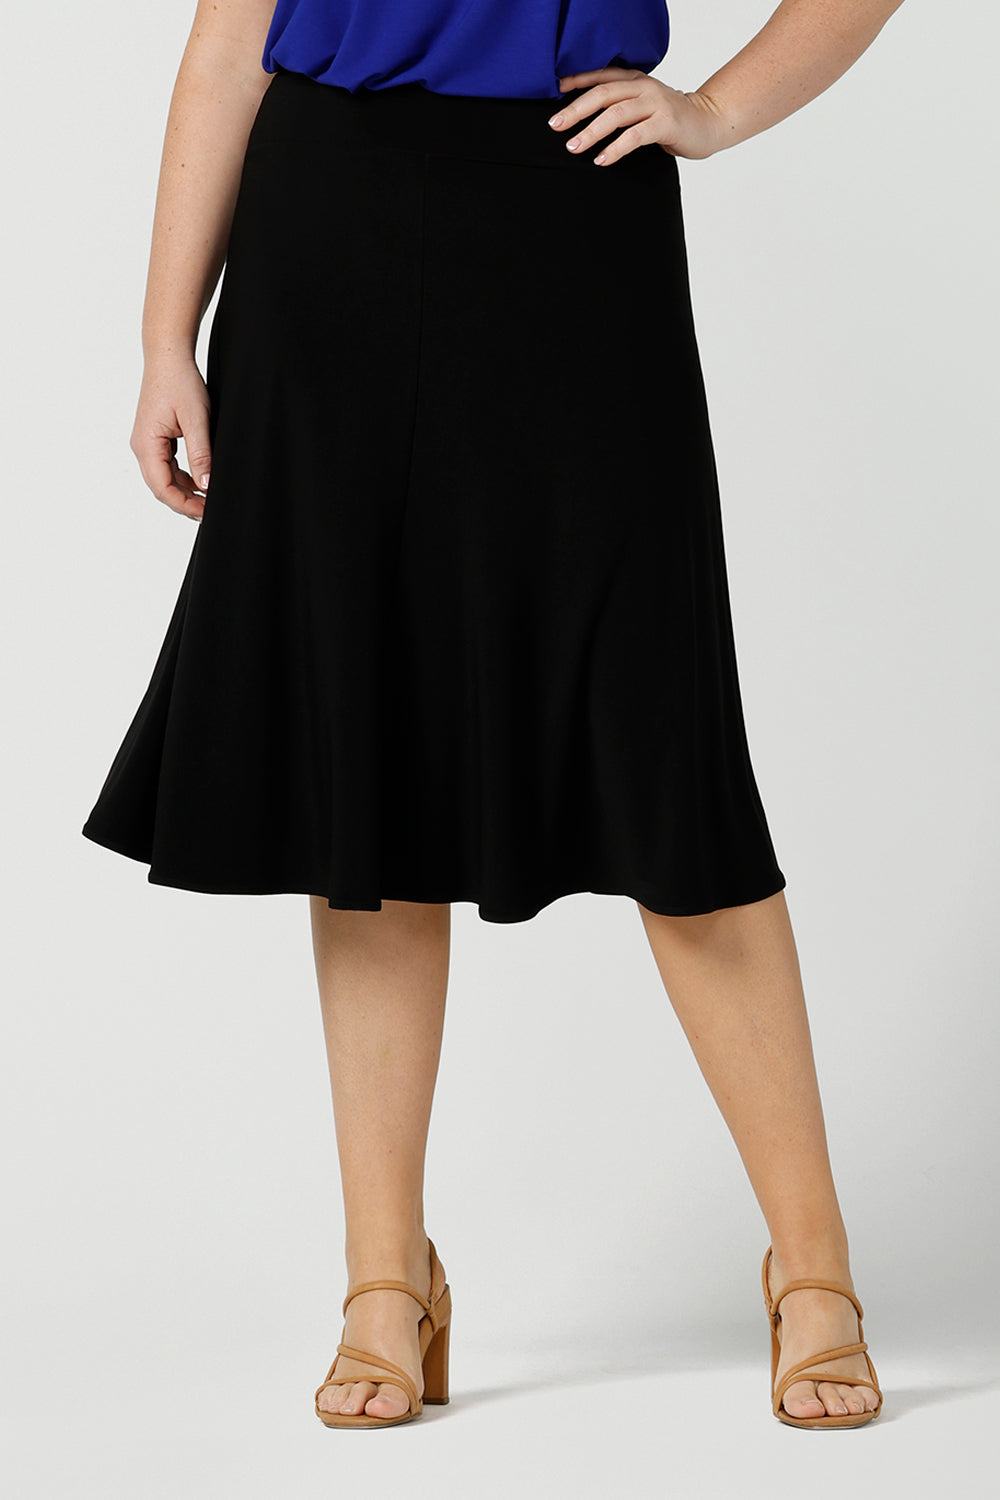 A black skirt by Australian made clothing brand, Leina & Fleur, this knee length, A-line skirt falls softly in black jersey. A comfortable skirt for petite to plus size workwear, this skirt is shown on a size 12, curvy woman. A good black skirt for your capsule wardrobe, shop skirts in sizes 8 to 24 at Leina & Fleur's online clothing boutique Australia.